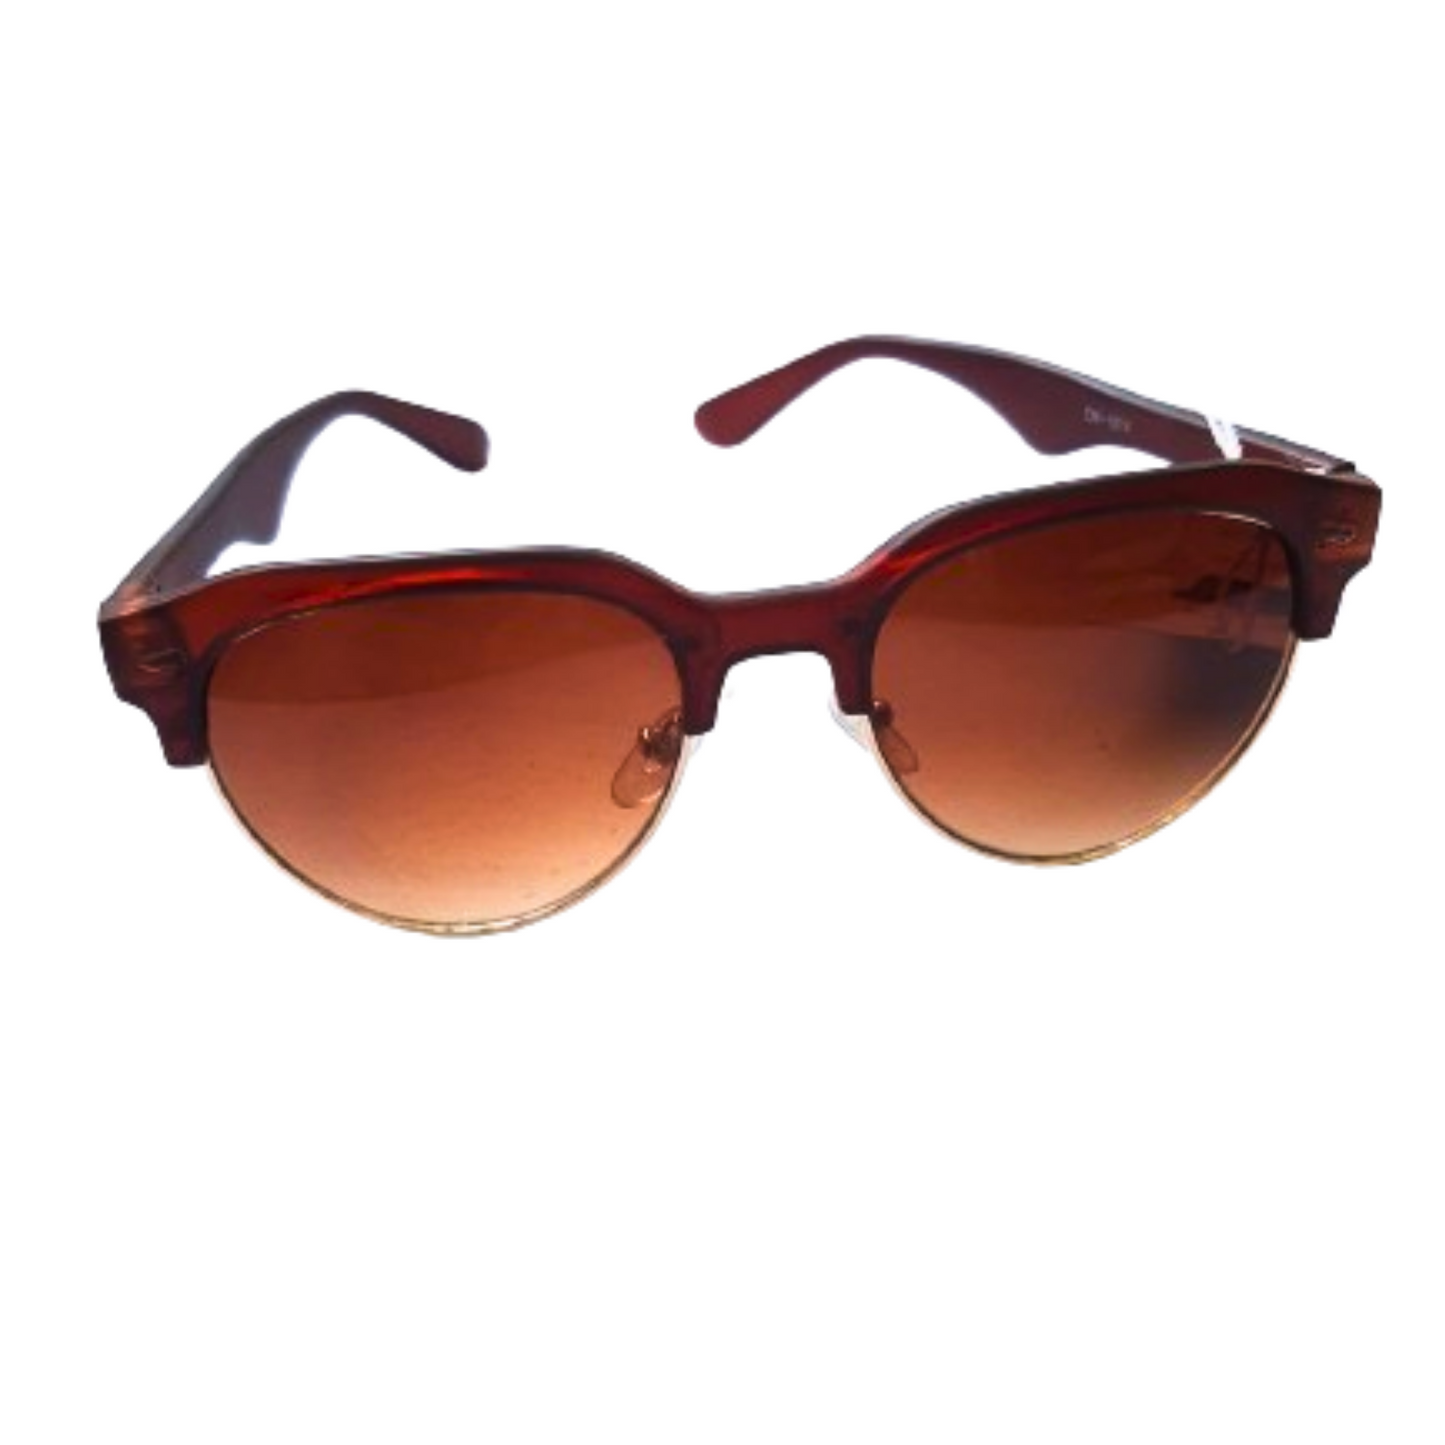 Vintage Round Brown Sunglasses for Women